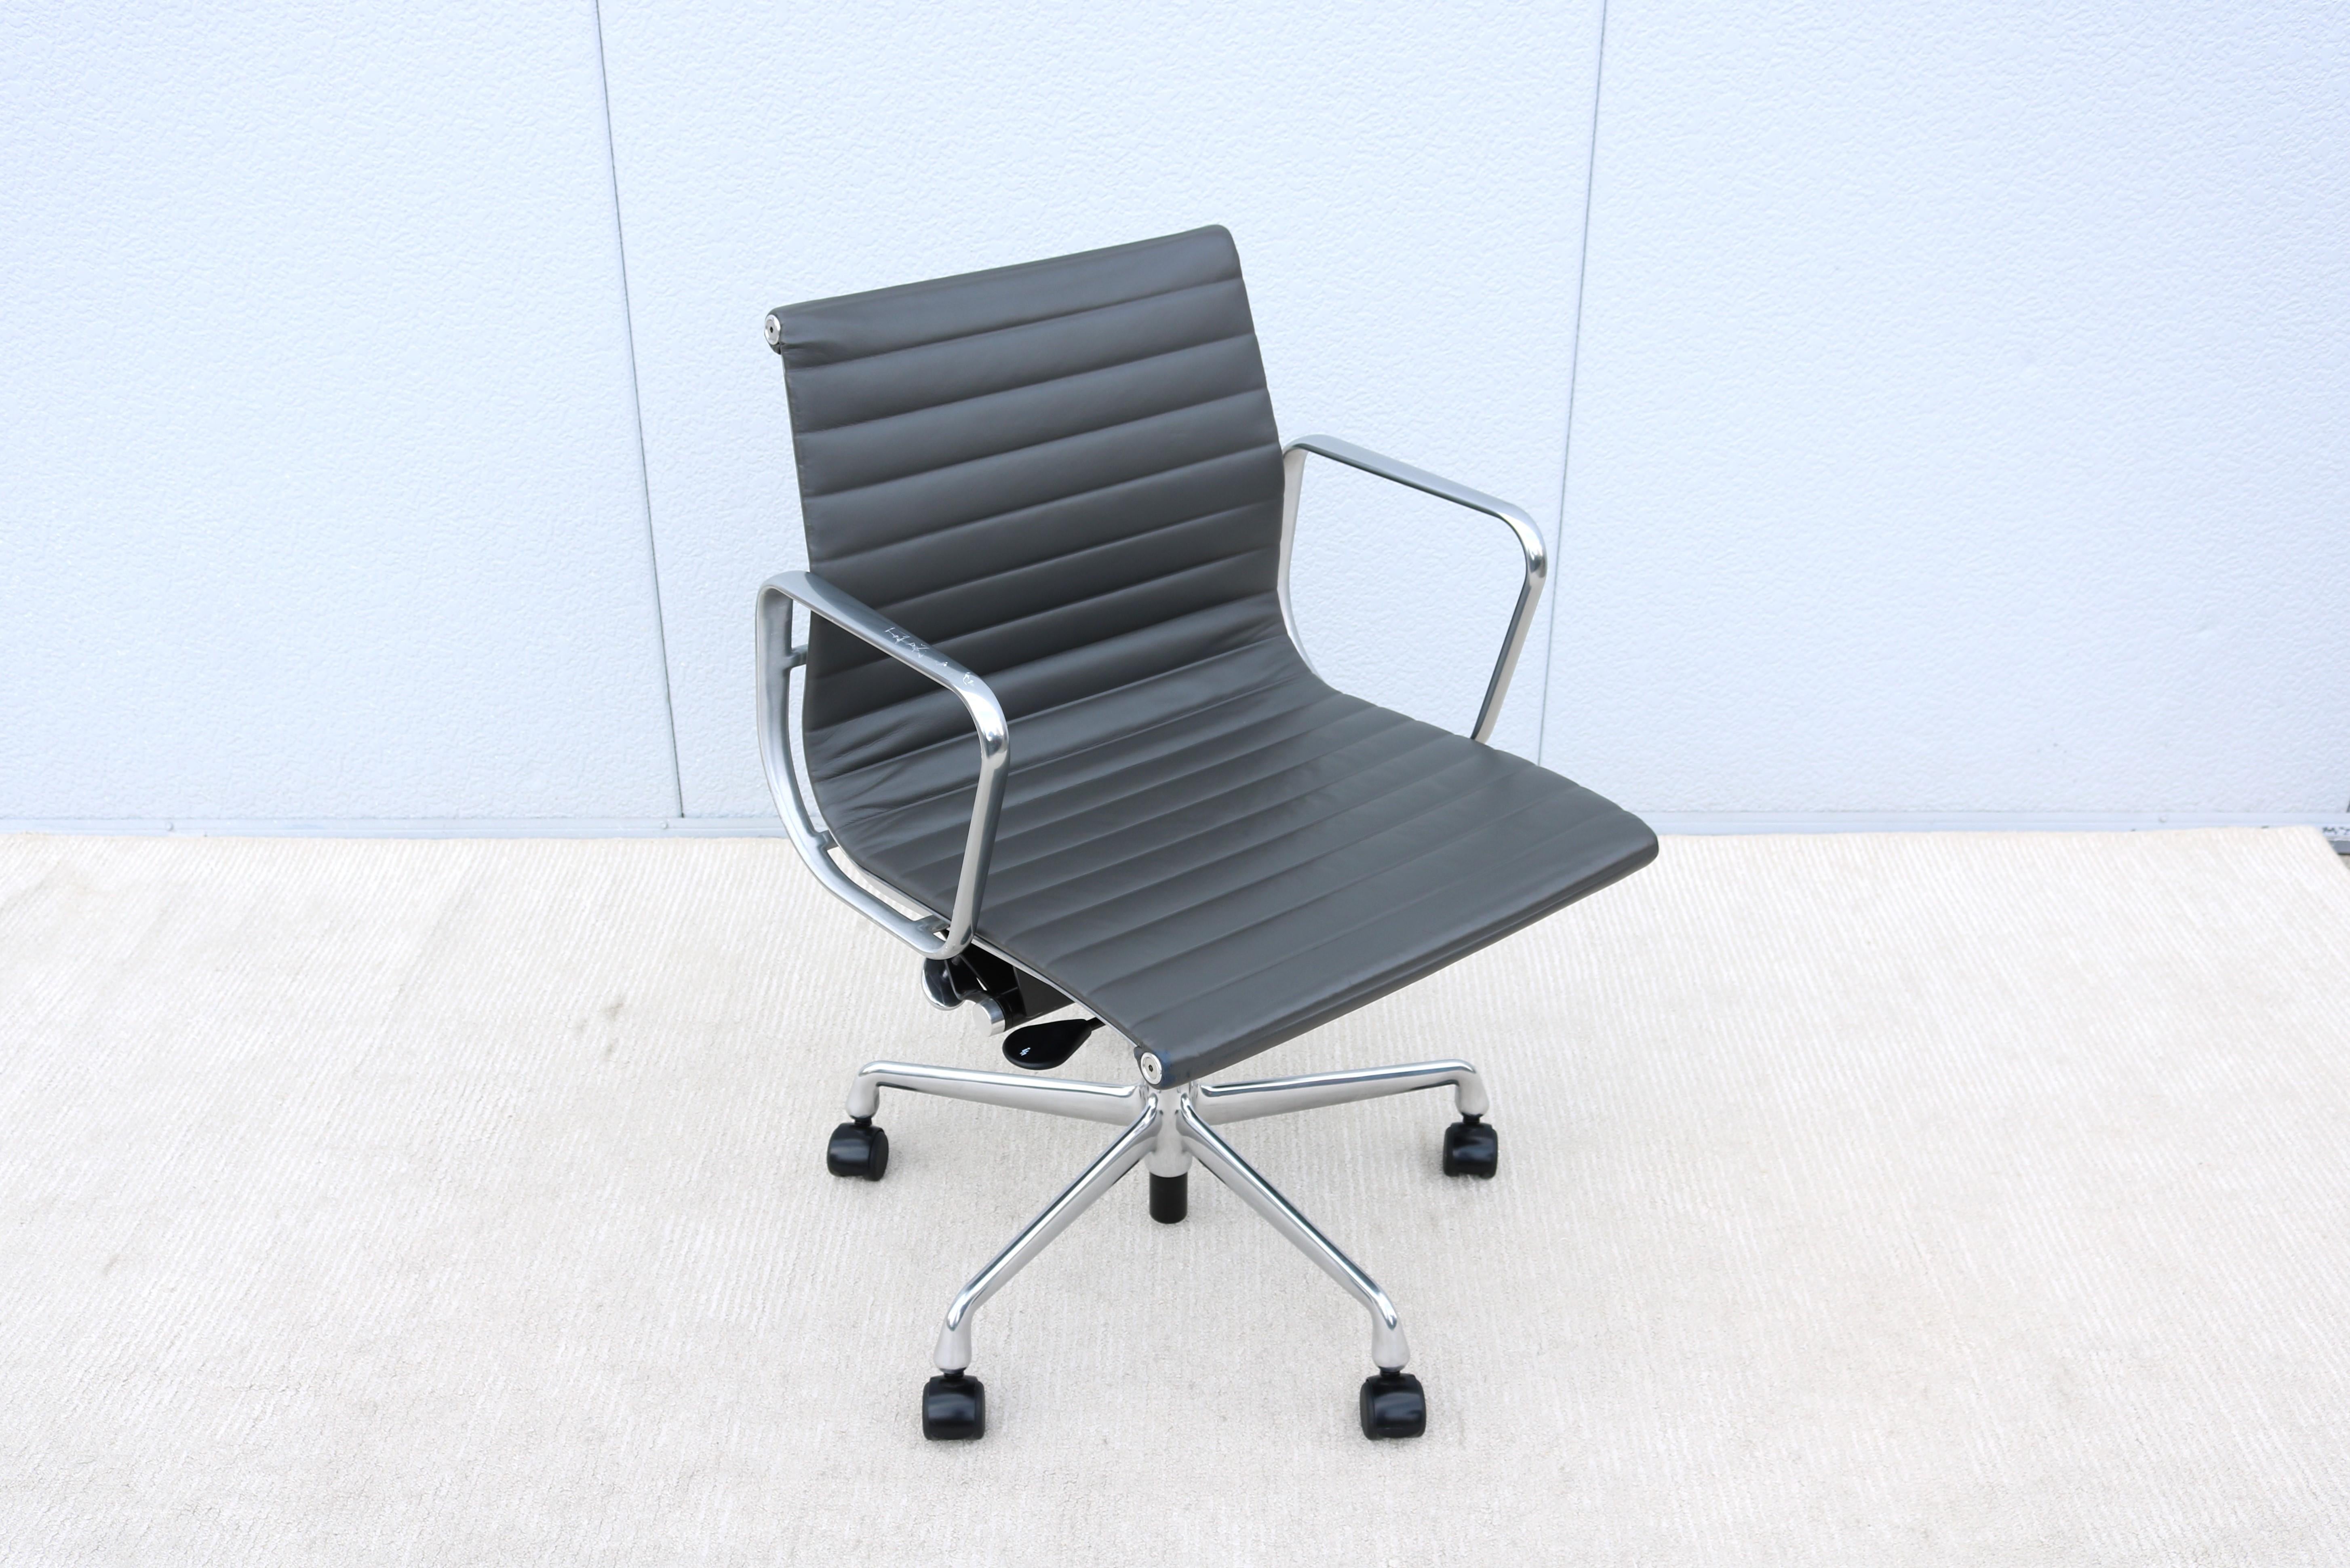 Stunning authentic Mid-Century Modern Eames aluminum group management chair.
A timeless design classic and contemporary with Innovative comfort features.
One of Herman Miller most popular chairs was designed in 1958 by Charles and Ray Eames.
These